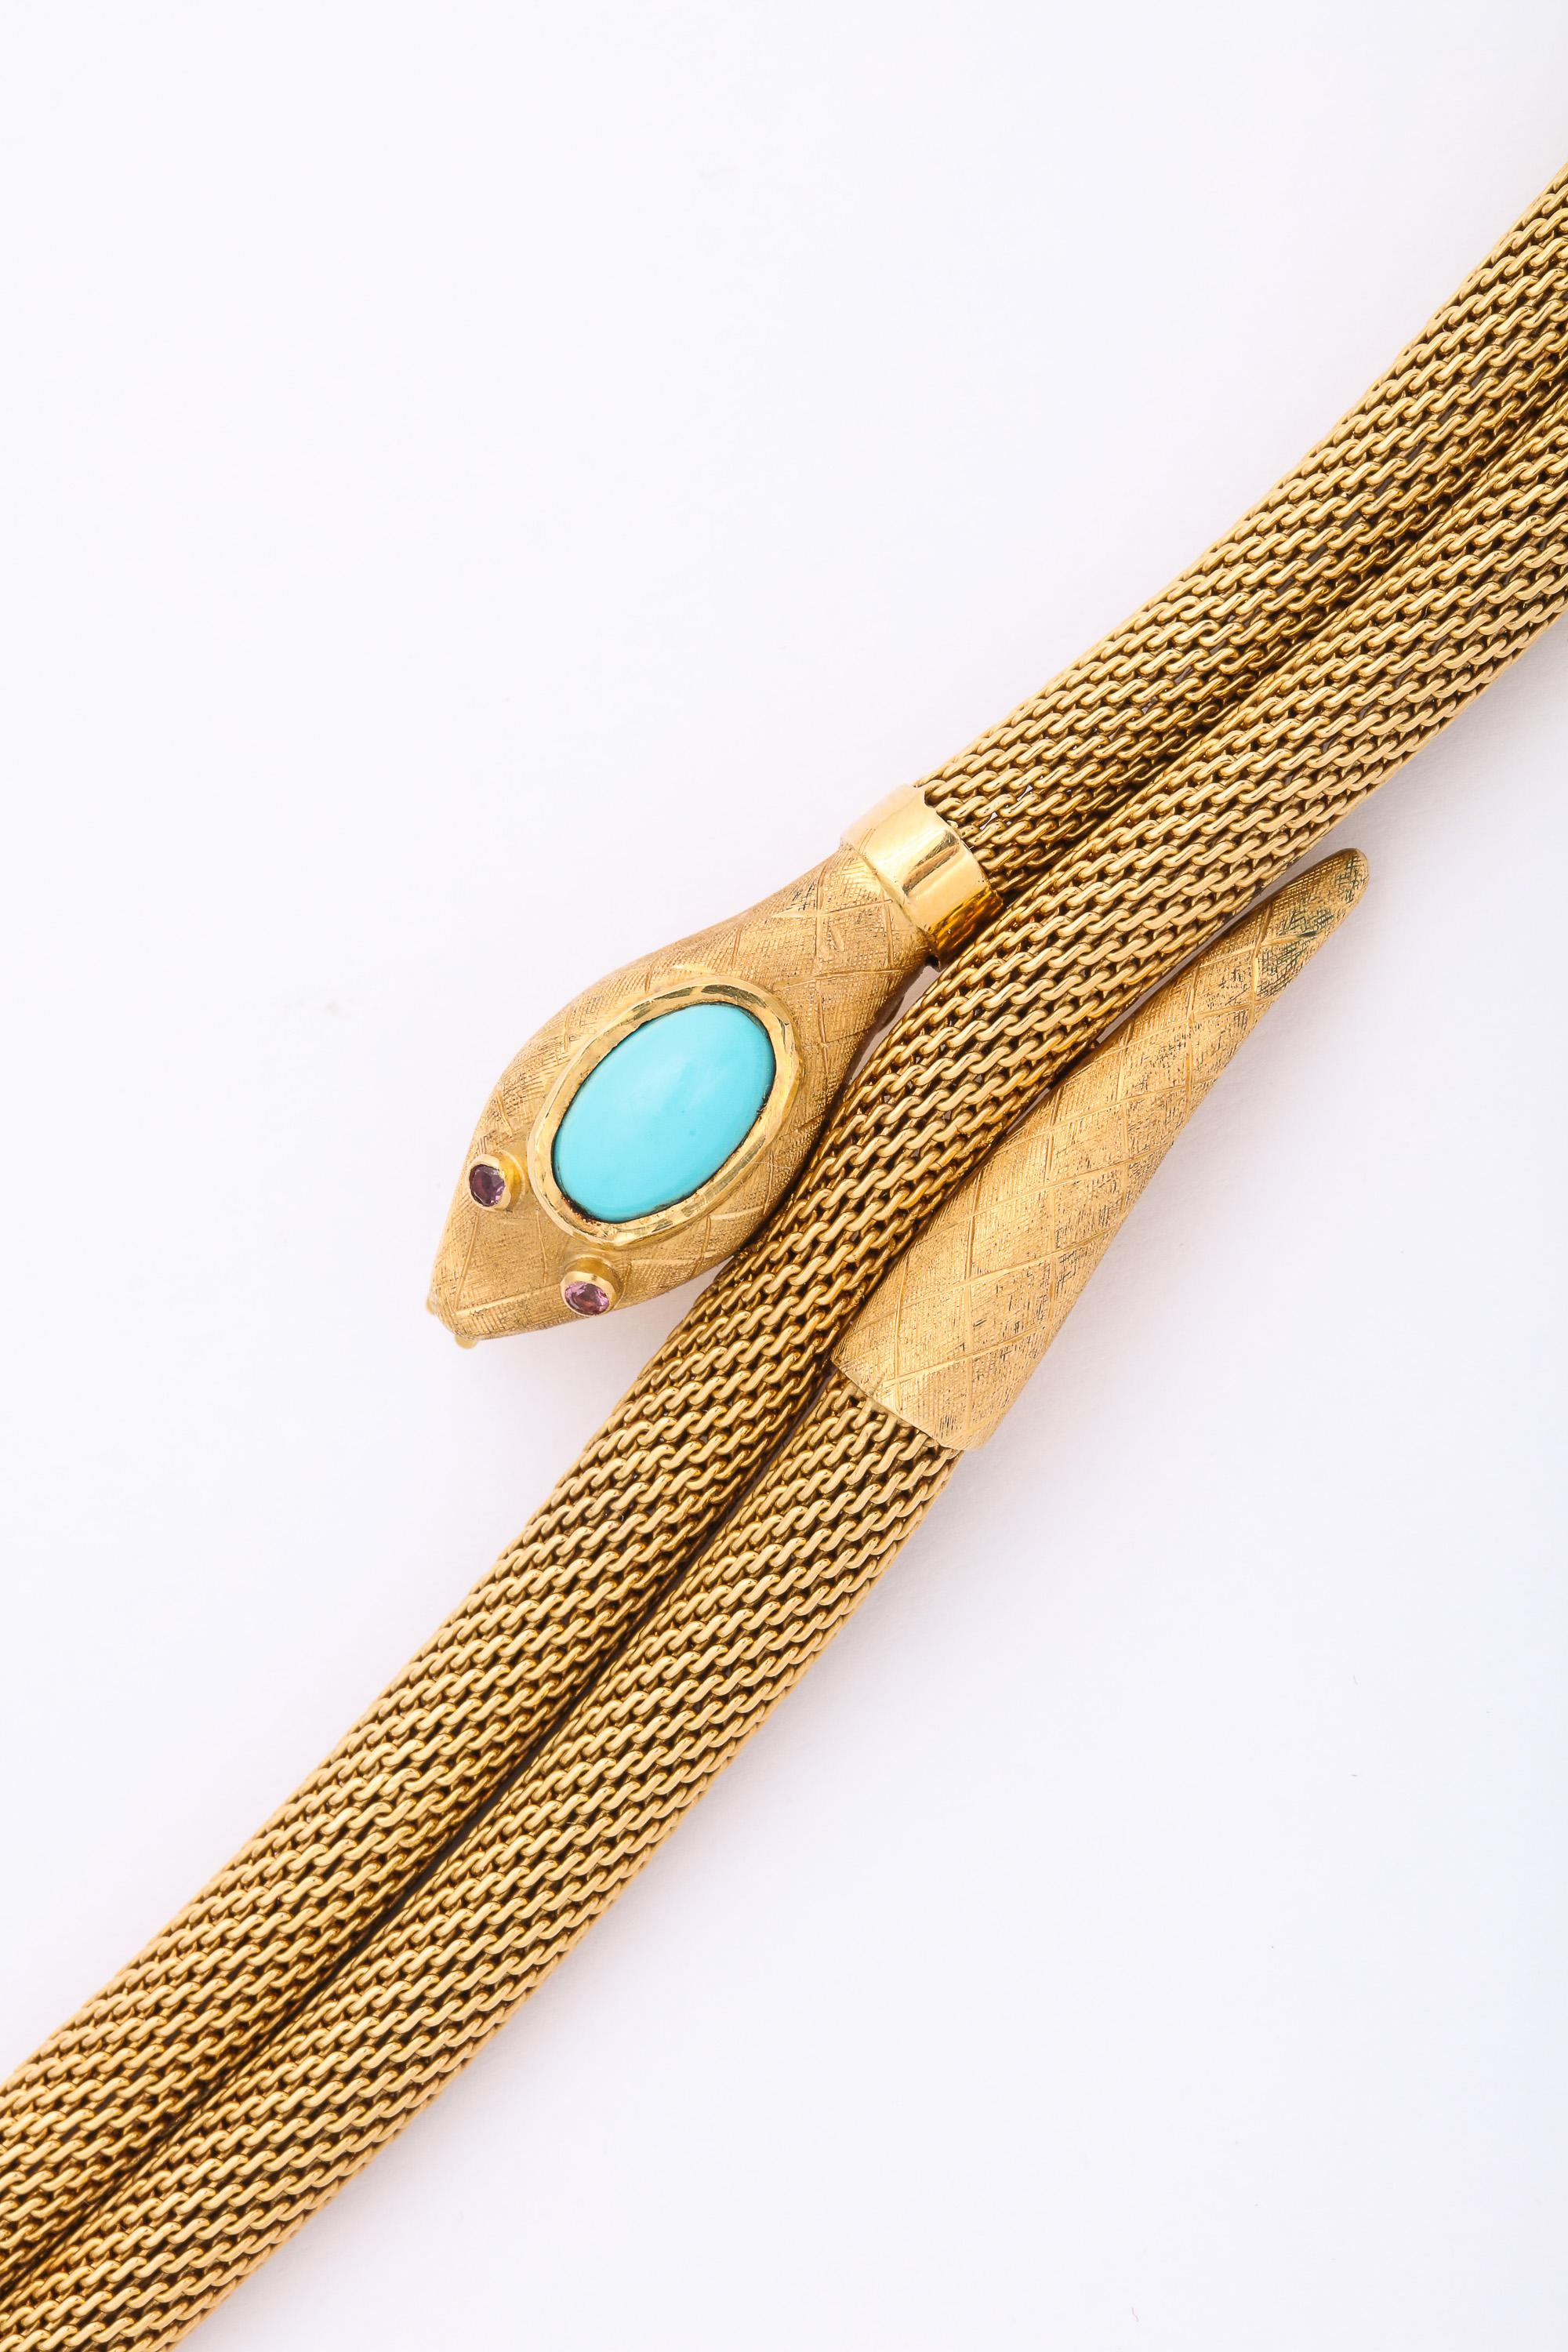 Double Woven Snake Bracelet with Persian Turquoise Head and Ruby Eyes 7